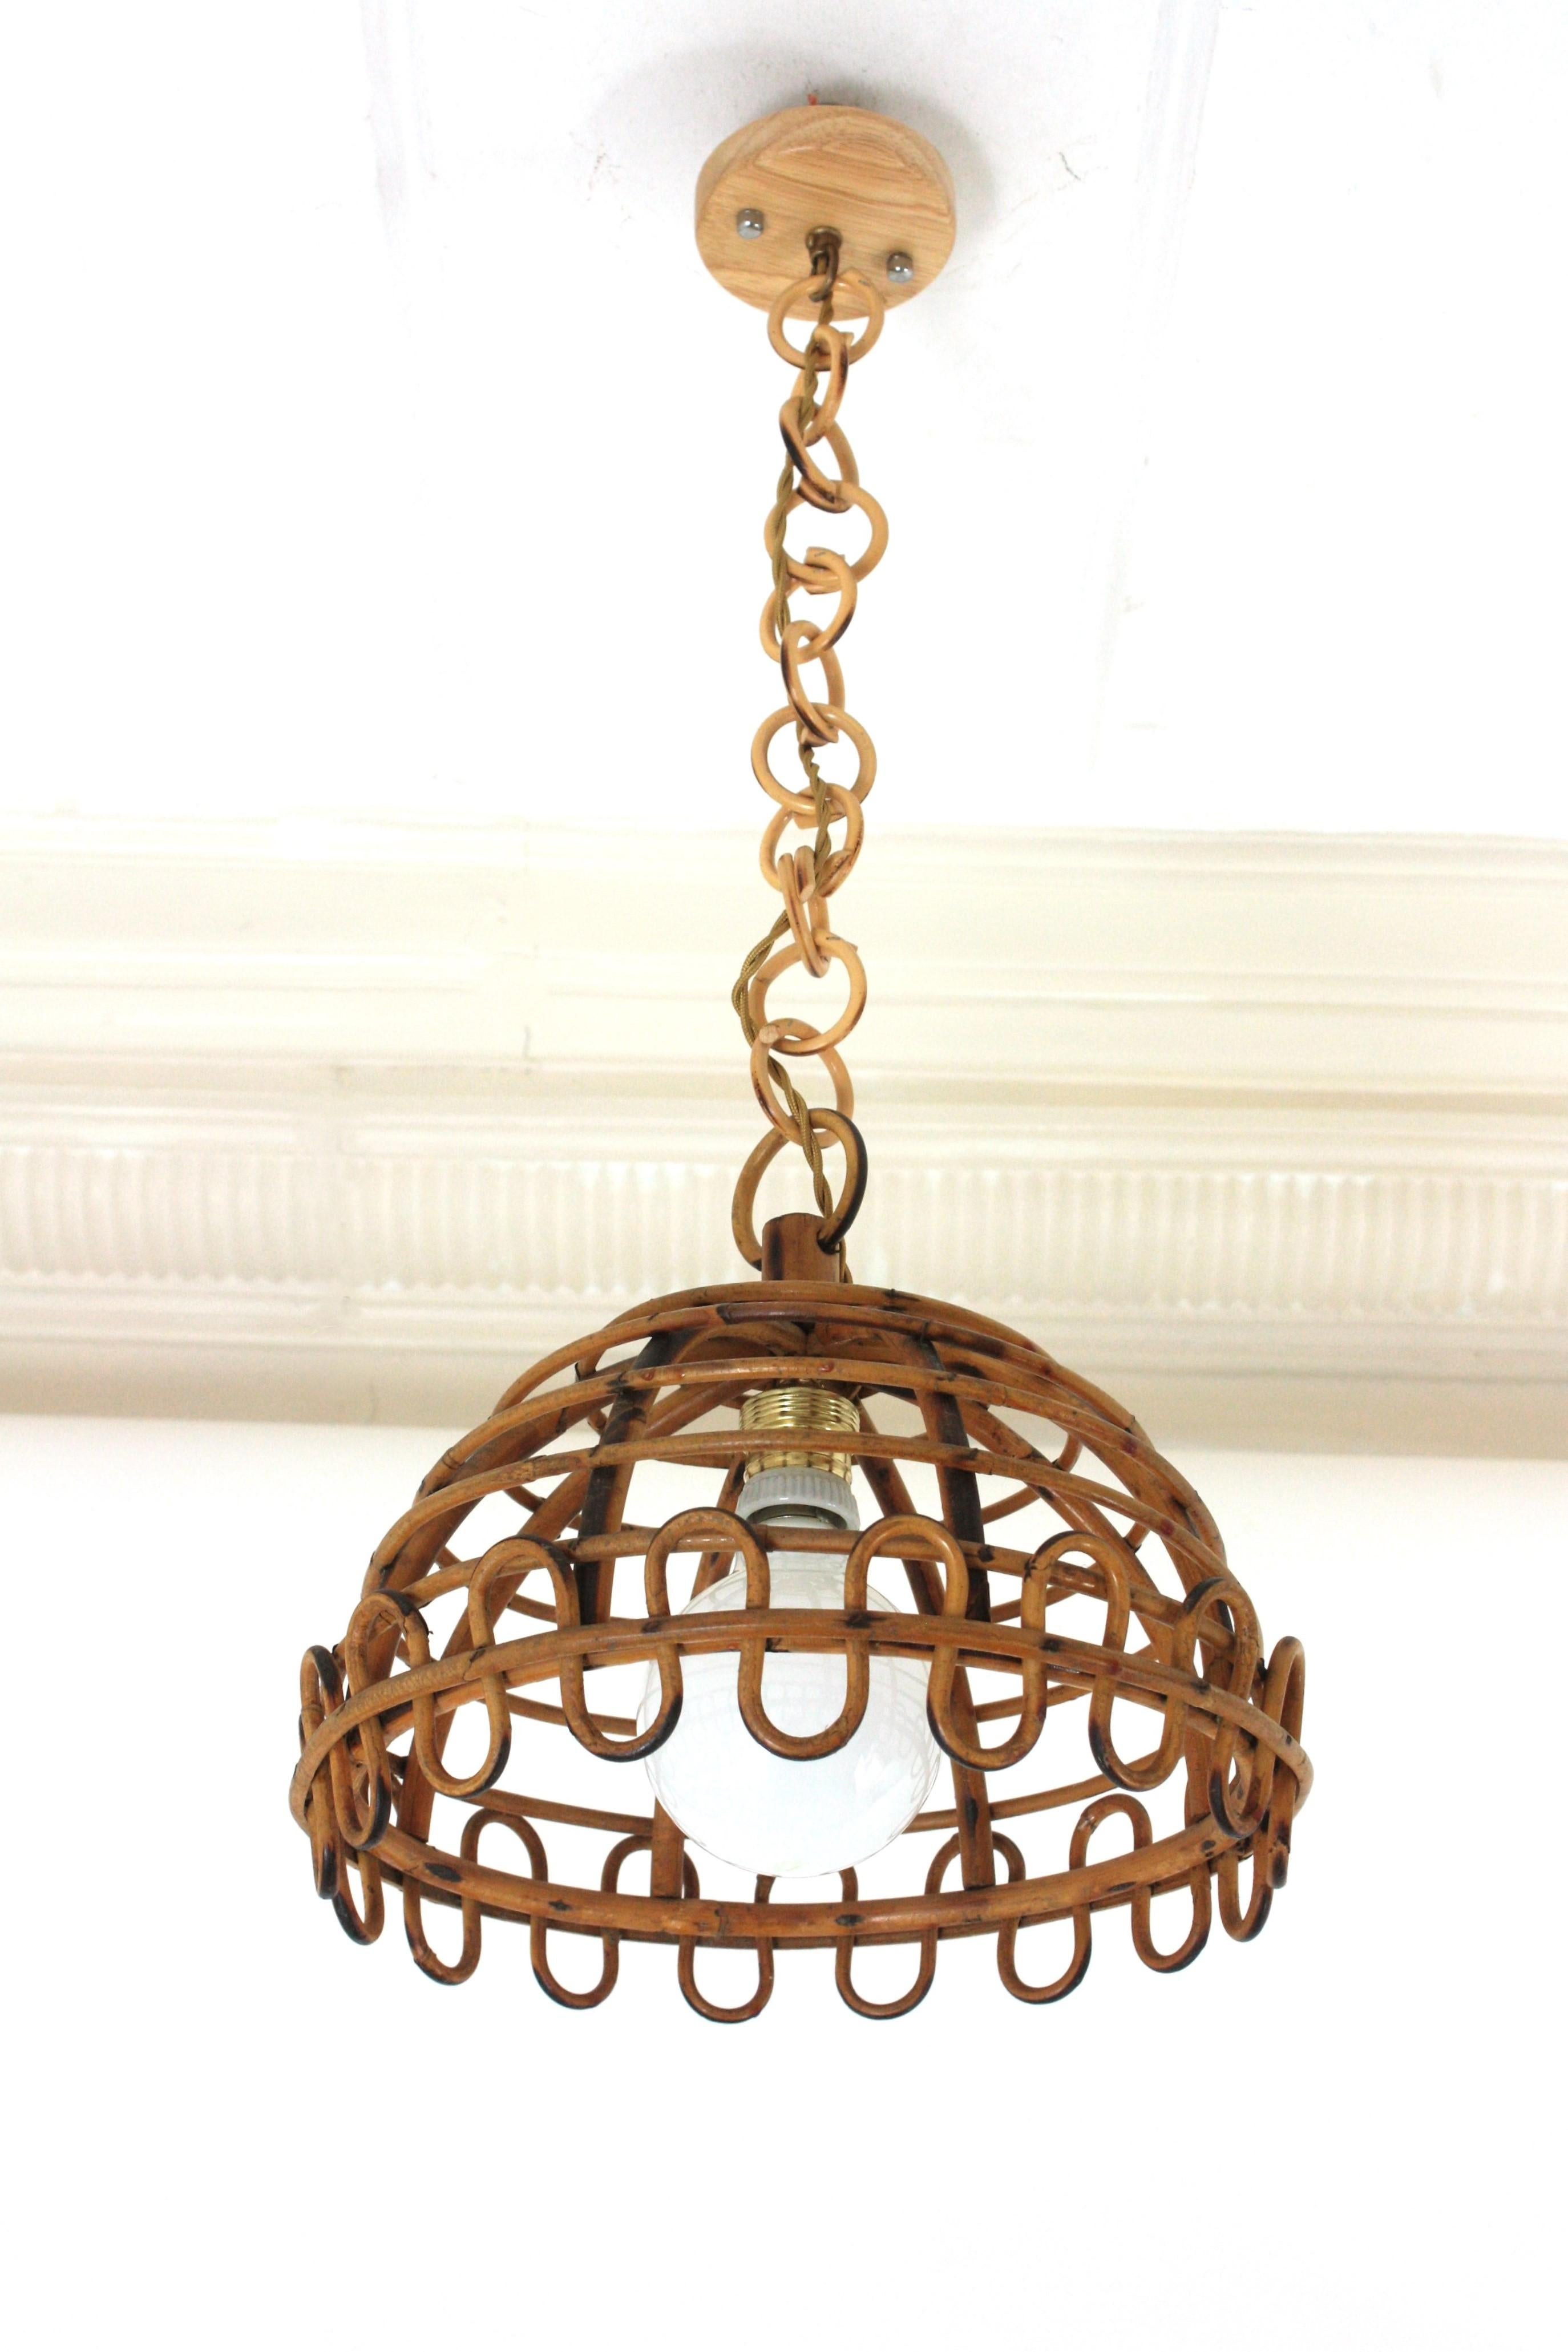 Hand-Crafted Franco Albini Rattan Dome Pendant Hanging Light, 1960s For Sale